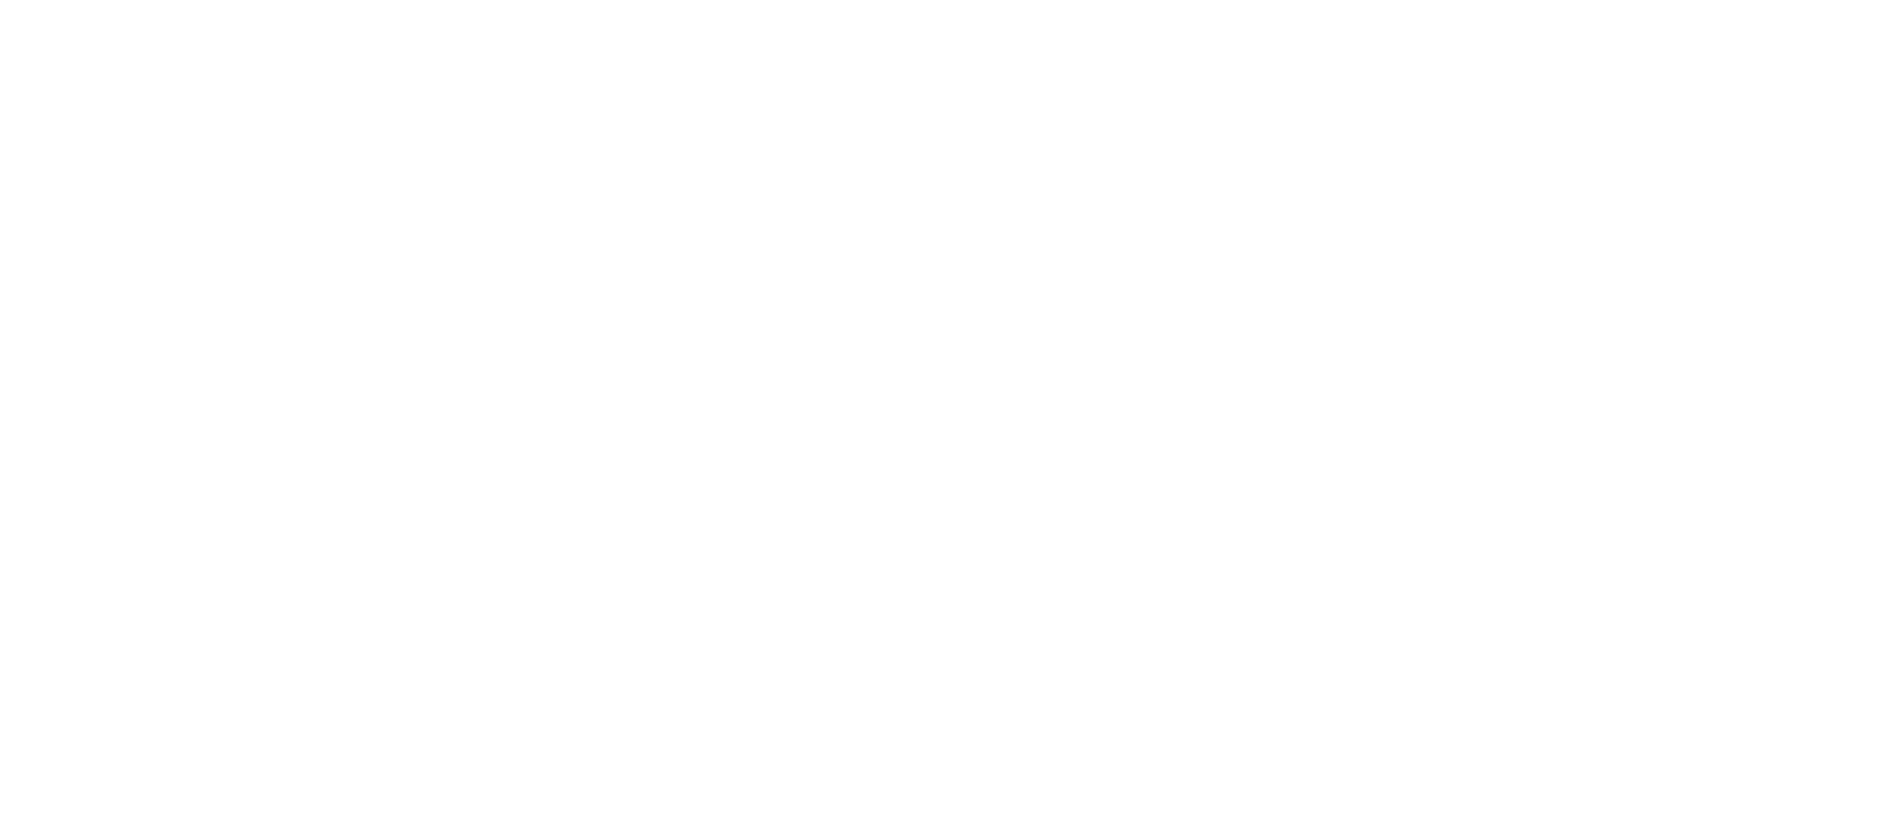 Mental Health Association for Chinese Communities (MHACC) is a proud supporter of LGBTQ rights